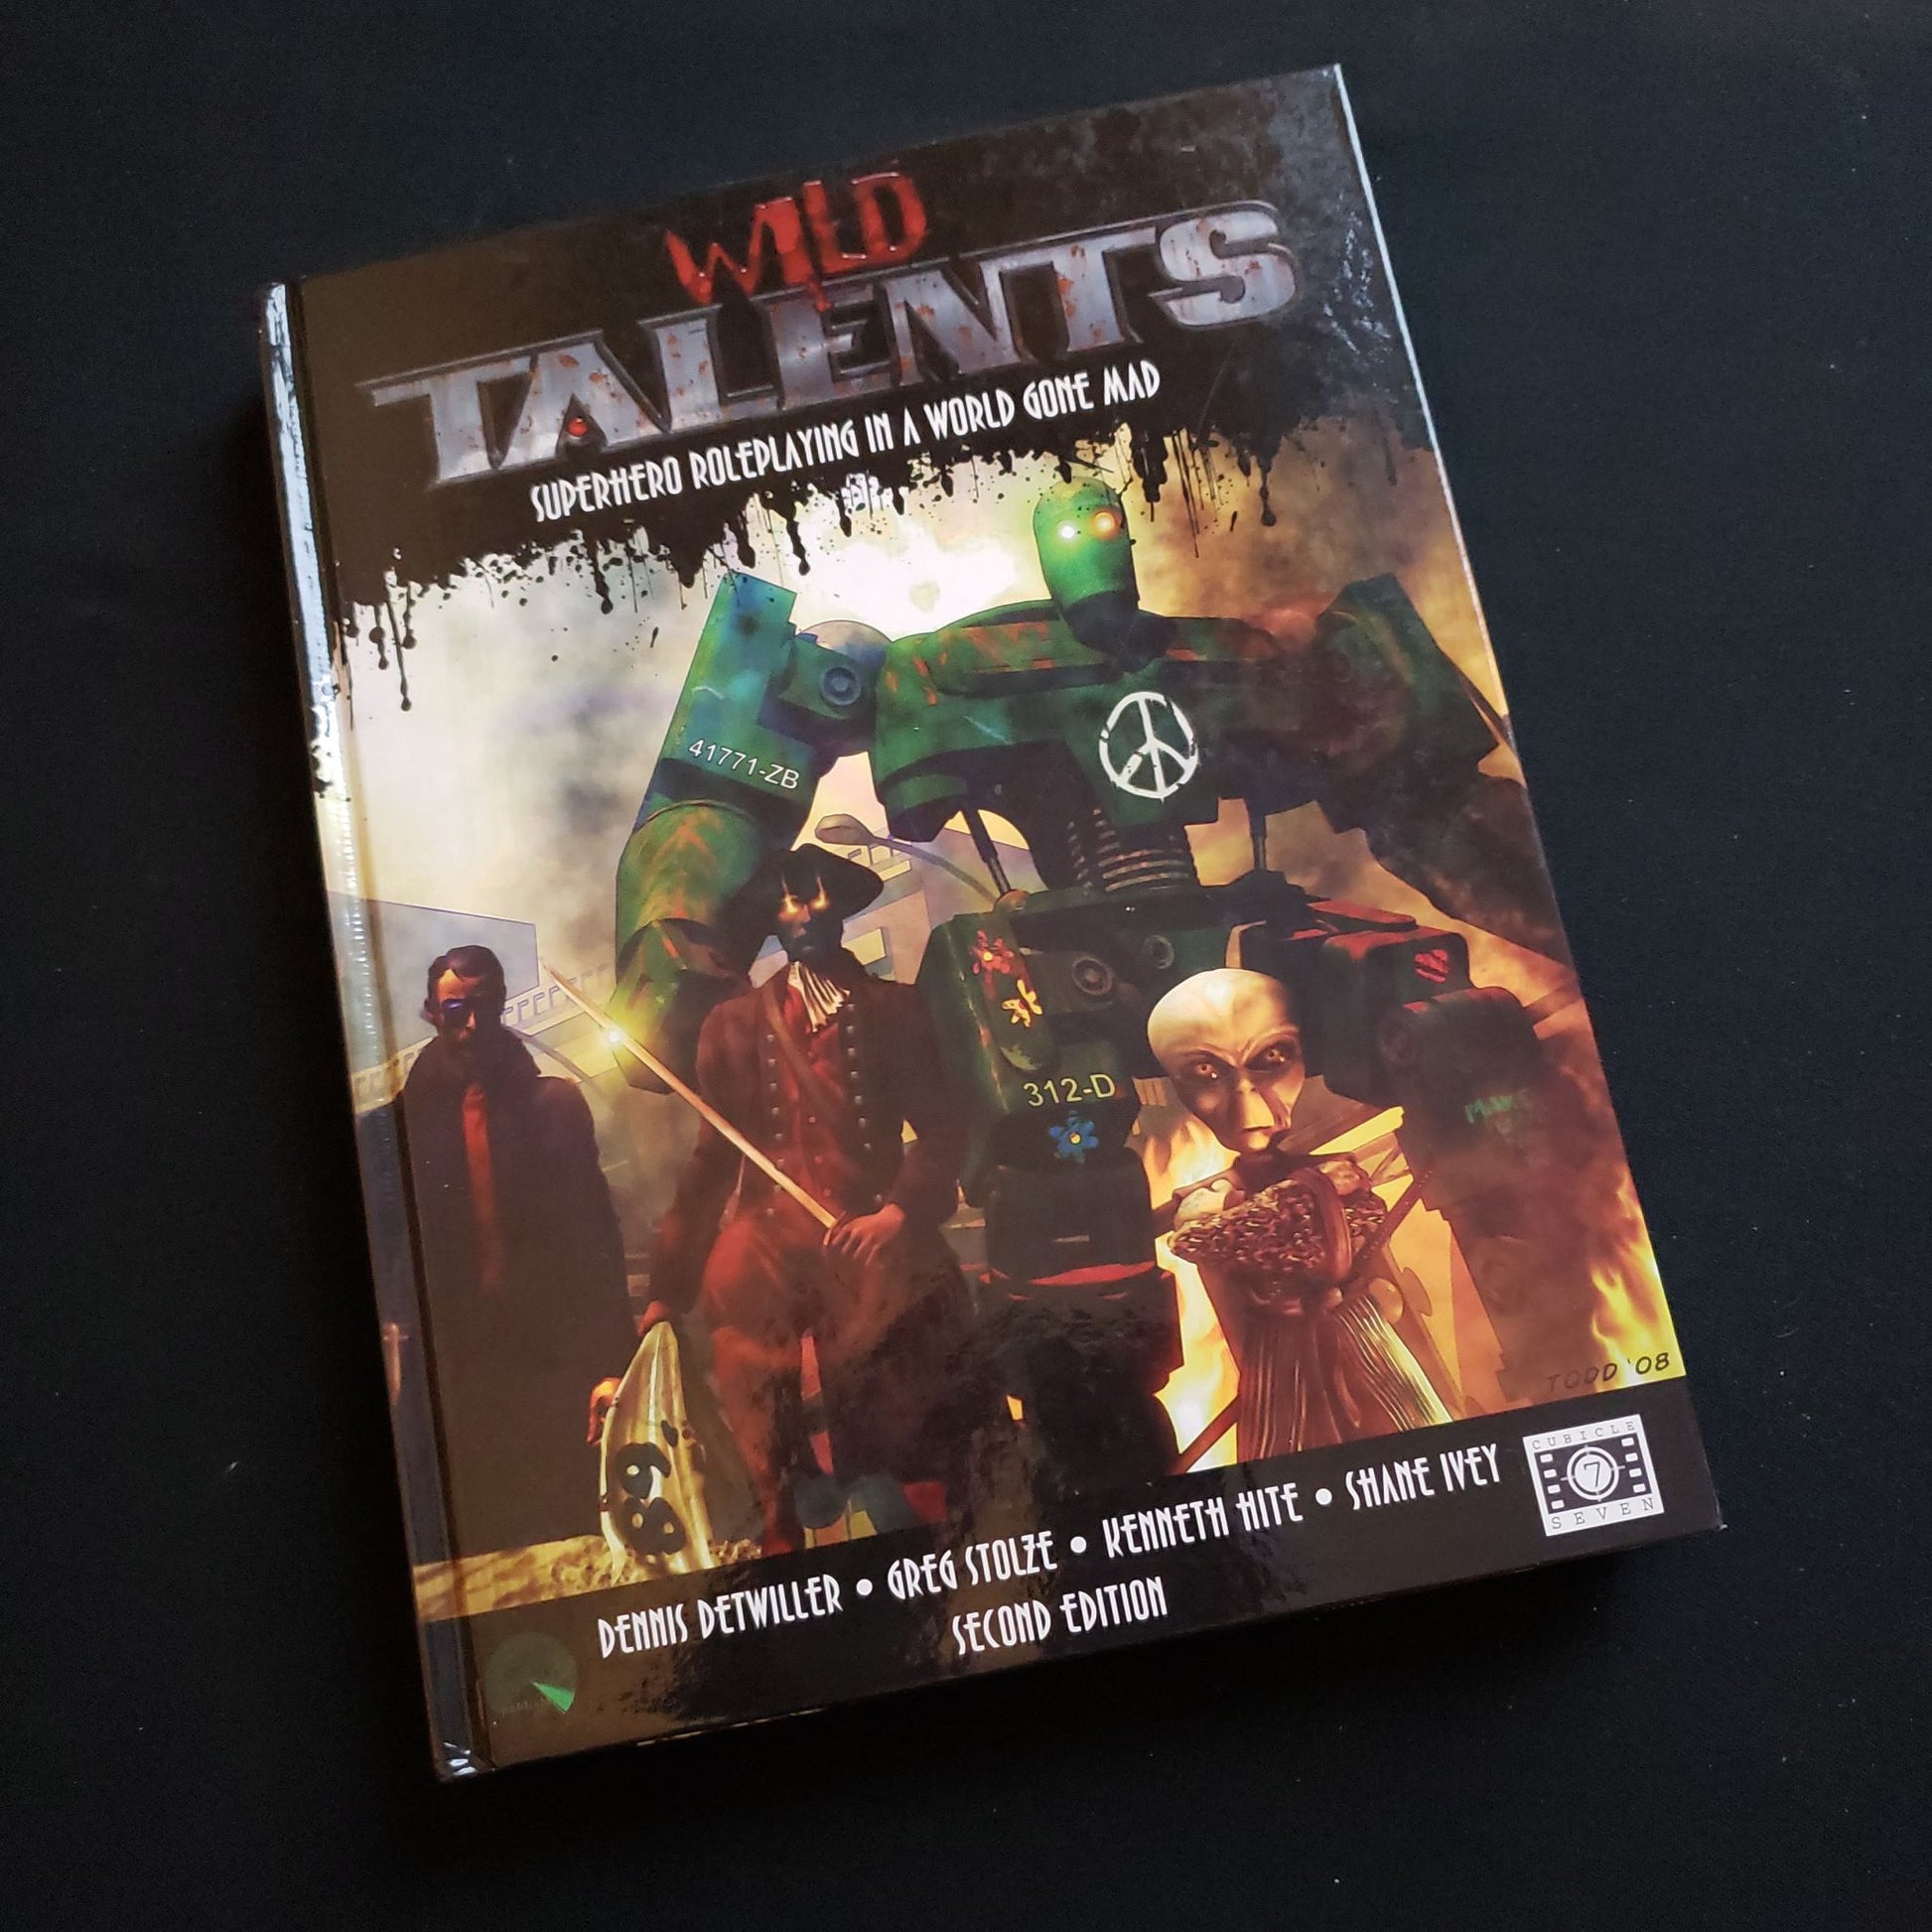 Wild talents RPG second edition core rulebook - front cover of book